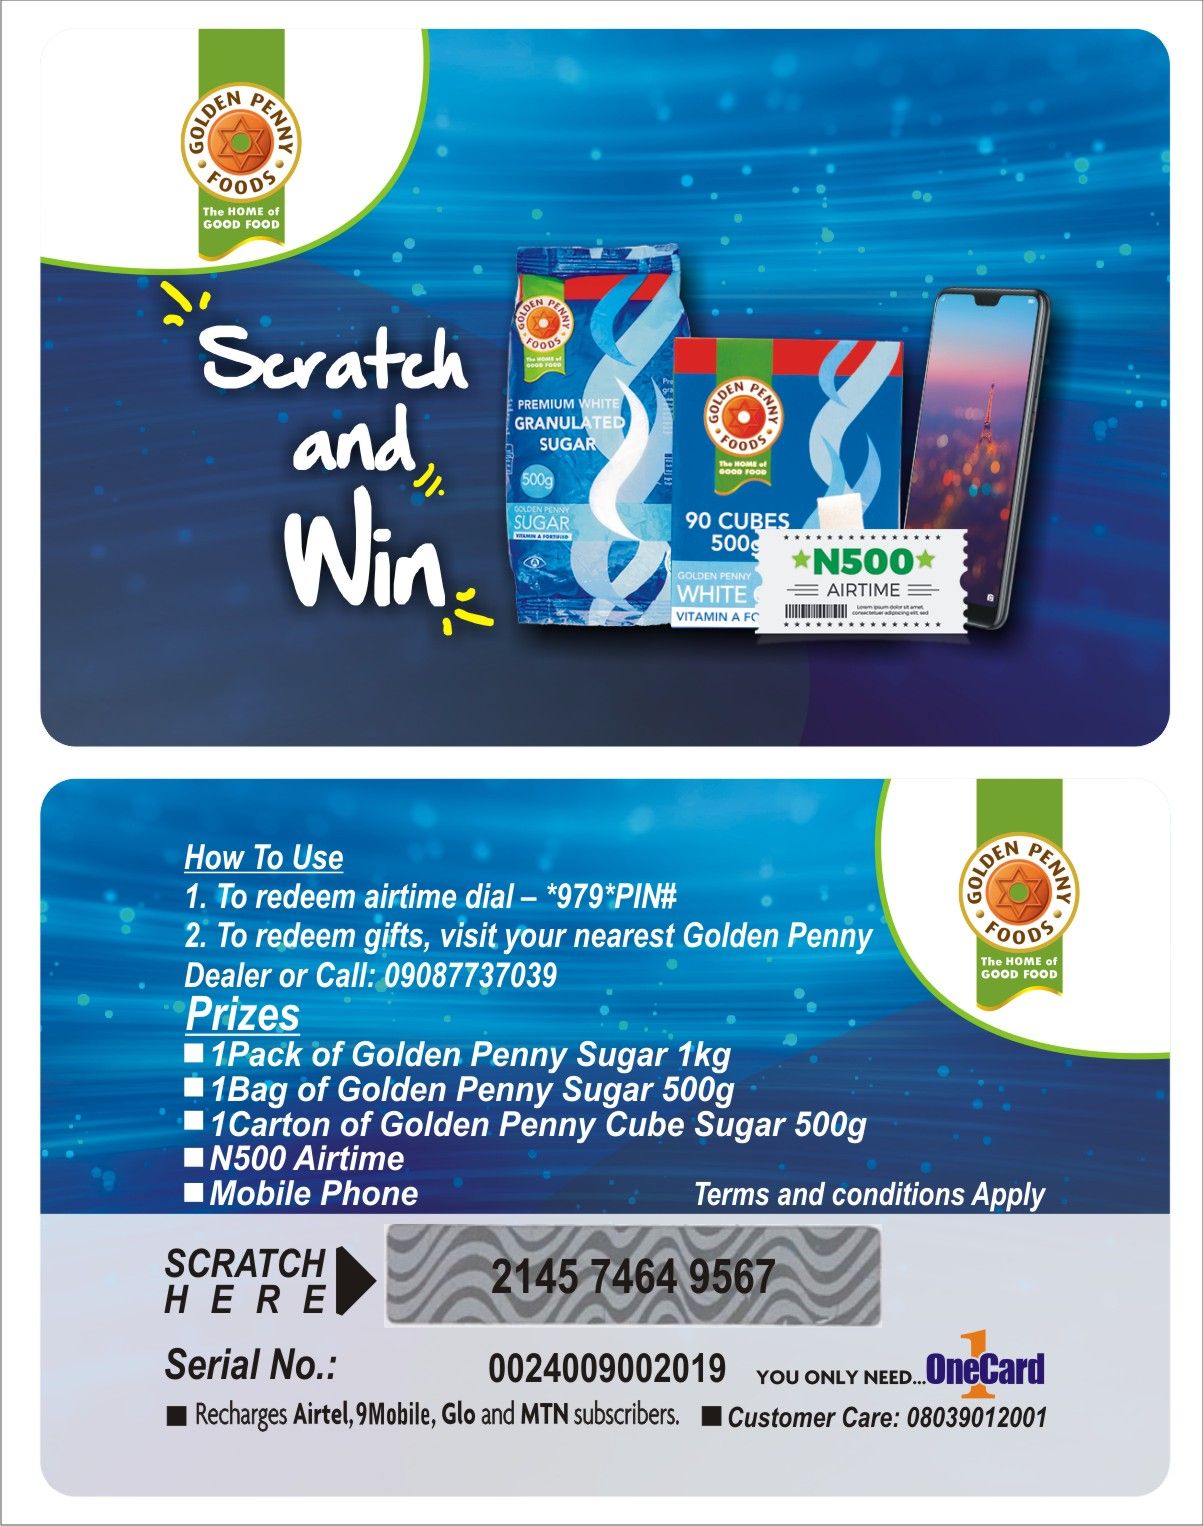 CALL CHINEDU ON 08179651585 TO PRINT SCRATCH AND WIN PROMO CARDS, ONLINE PORTAL ACCESS SCRATCH CARDS,LOTTERY CARDS, SUBSCRIPTION / E-PAYMENT CARDS, ADHESIVE SCRATCH AND WIN PROMO STICKERS ETC